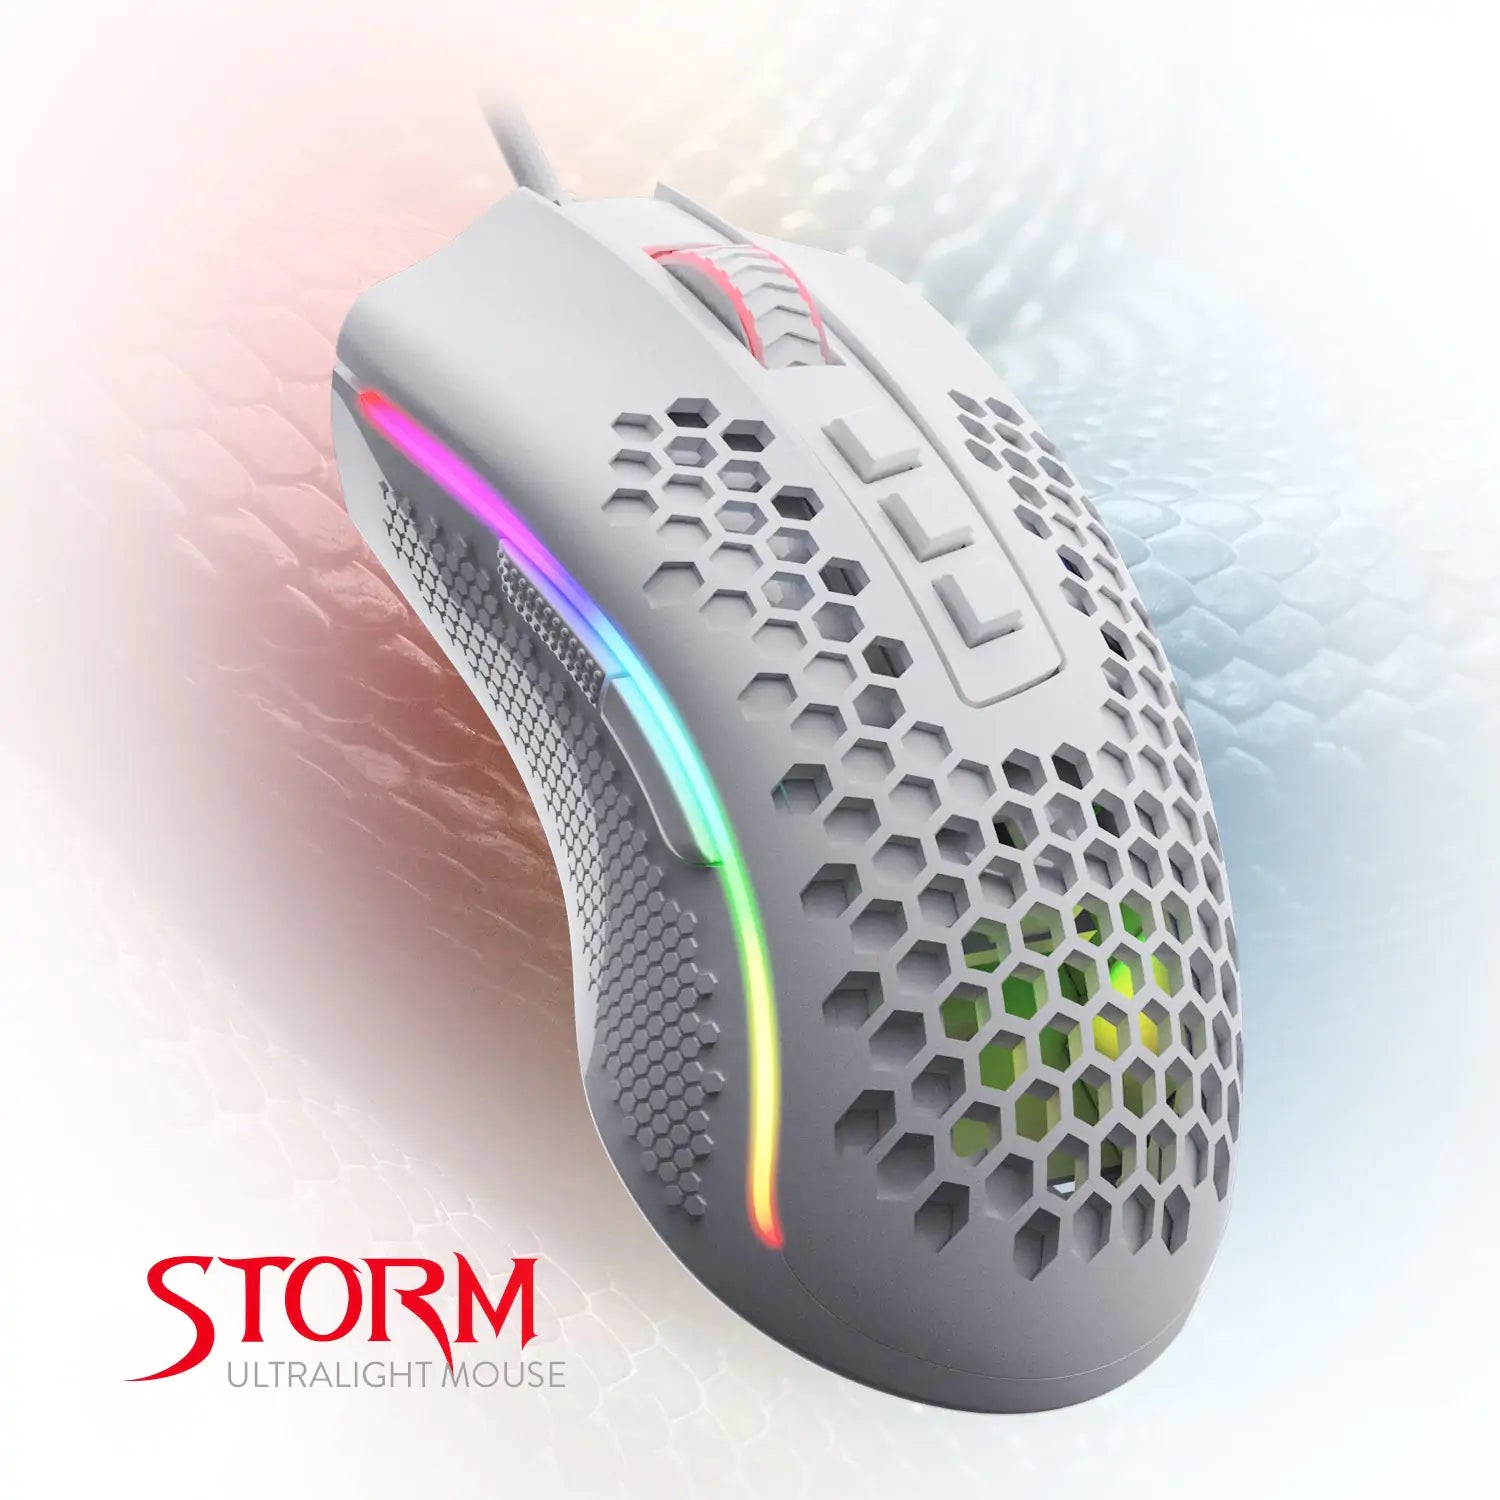 Redragon M808 Storm Lightweight RGB Gaming Mouse, 85g Ultralight Honeycomb Mouse